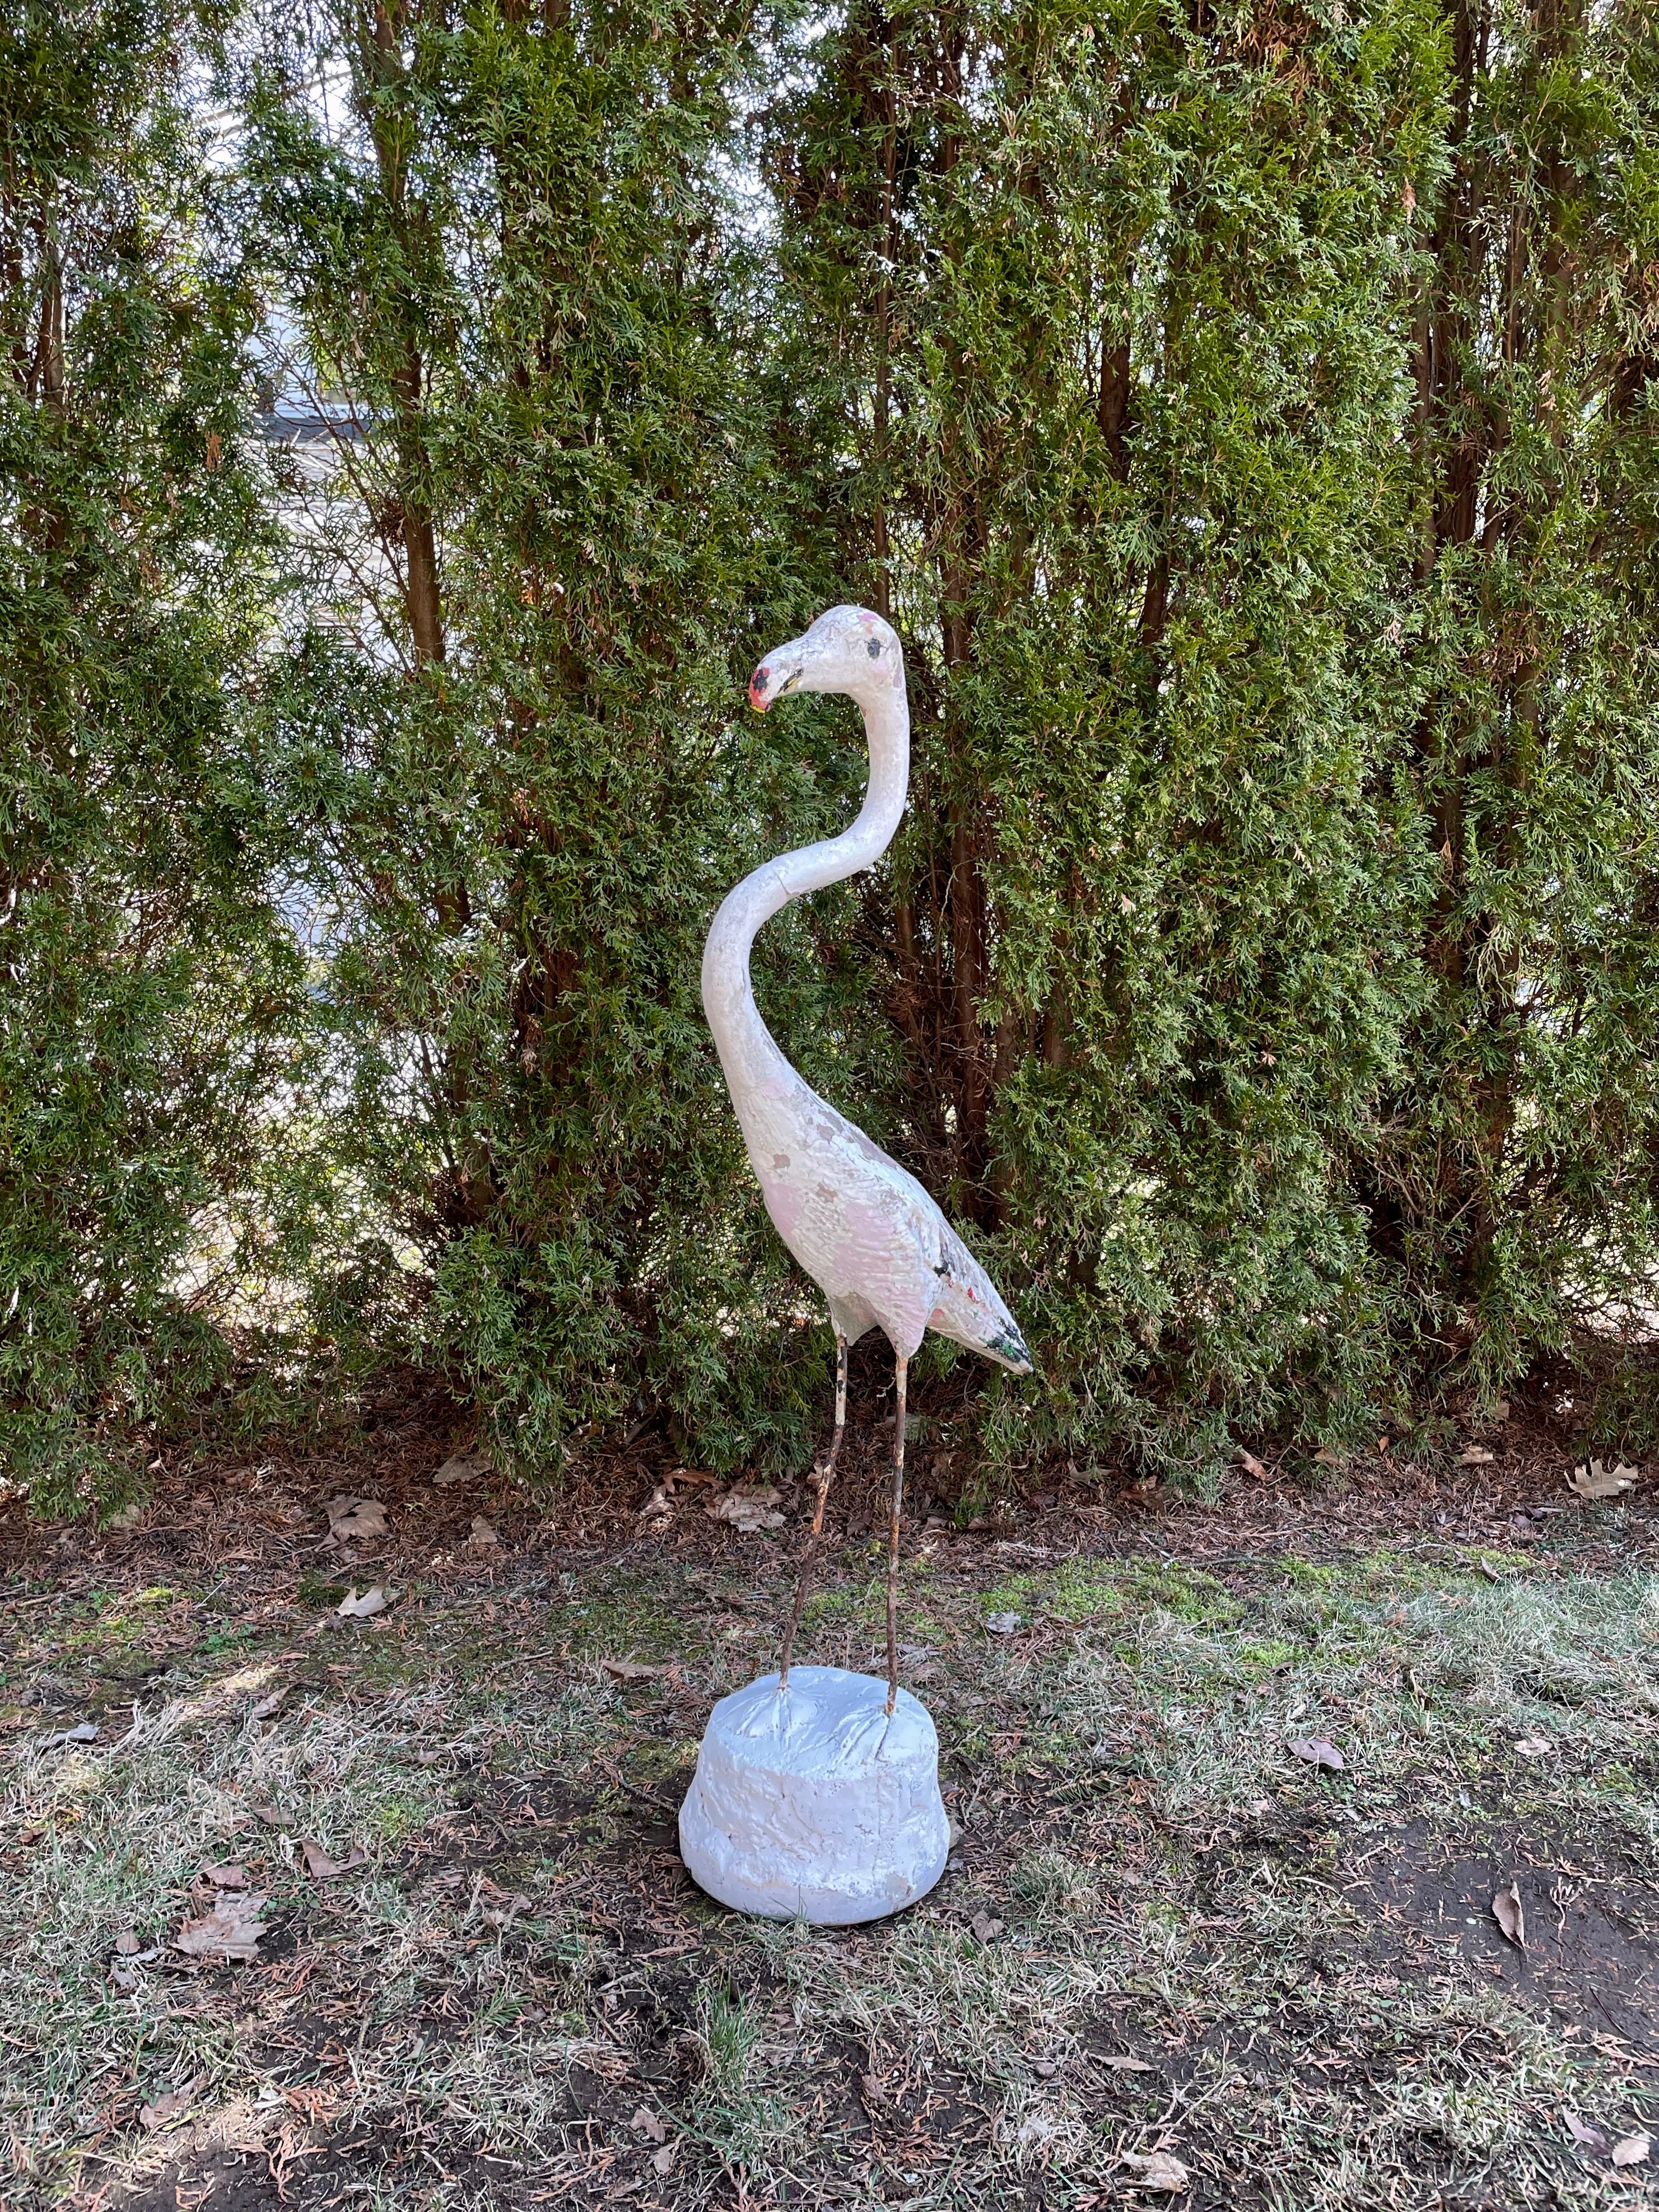 We jumped at the chance to buy this grouping of three French flamingos and this is the white flamingo with an orange/red beak. Made of cast stone with iron legs, and very solid, he cuts a dashing figure, and has a beautifully-weathered and crusty